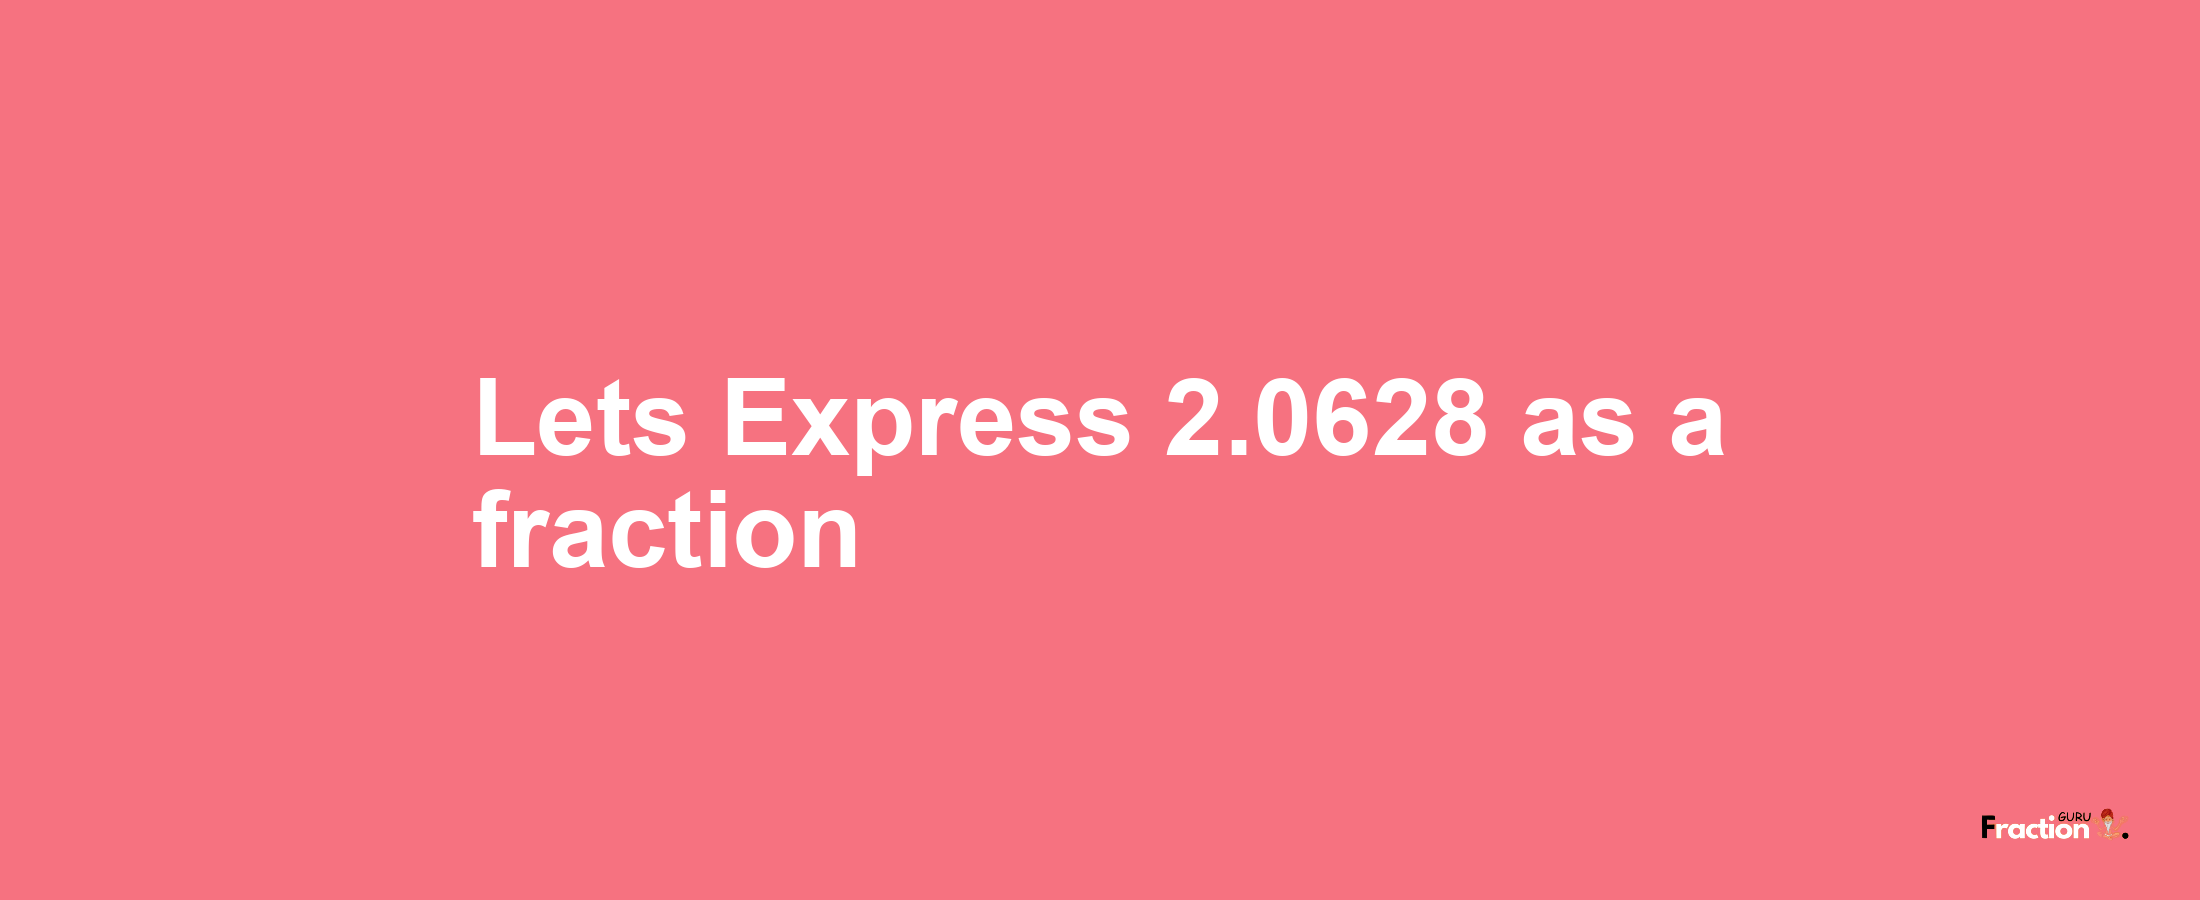 Lets Express 2.0628 as afraction